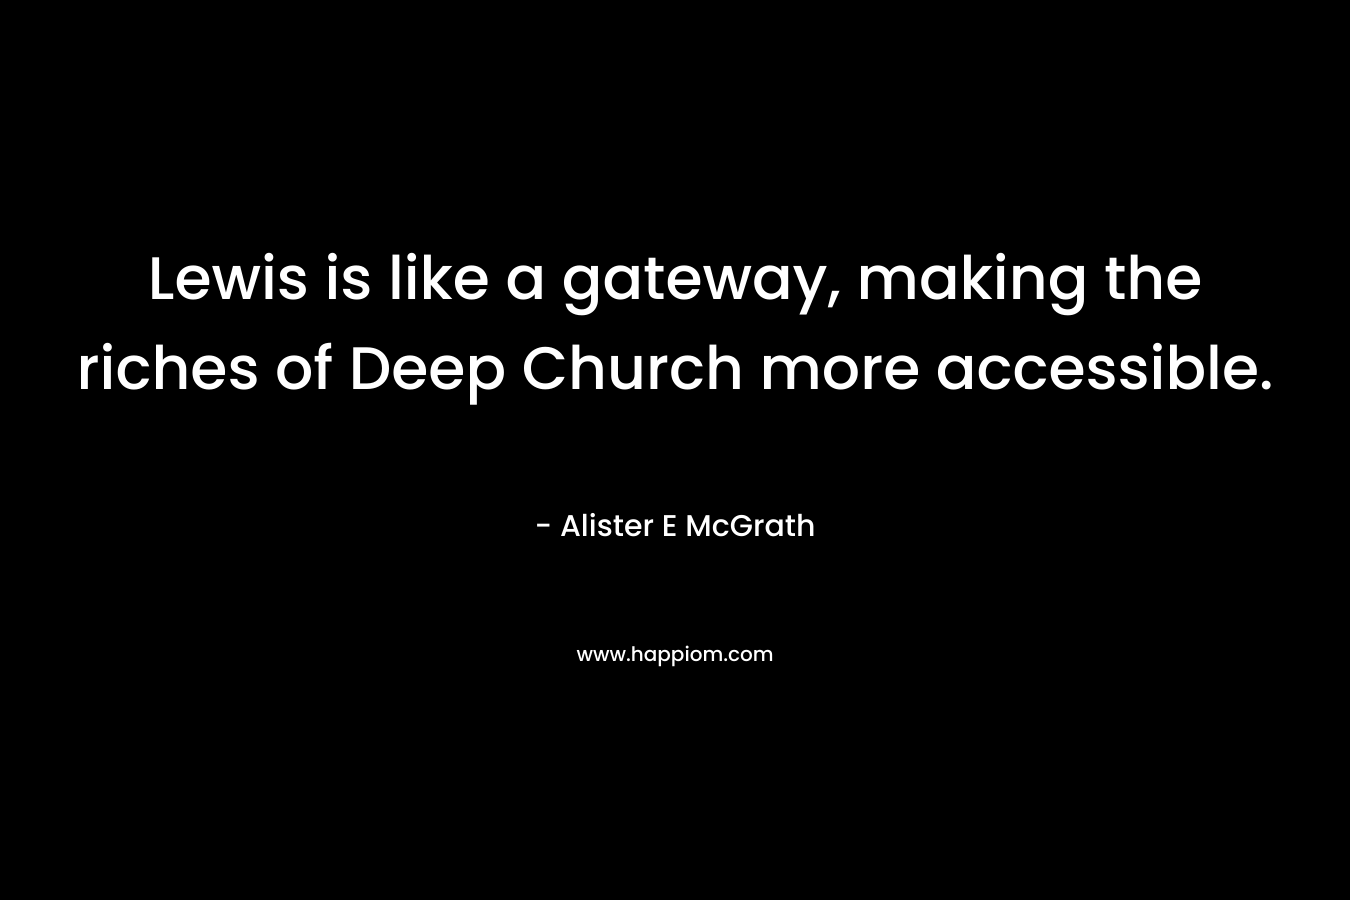 Lewis is like a gateway, making the riches of Deep Church more accessible. – Alister E McGrath